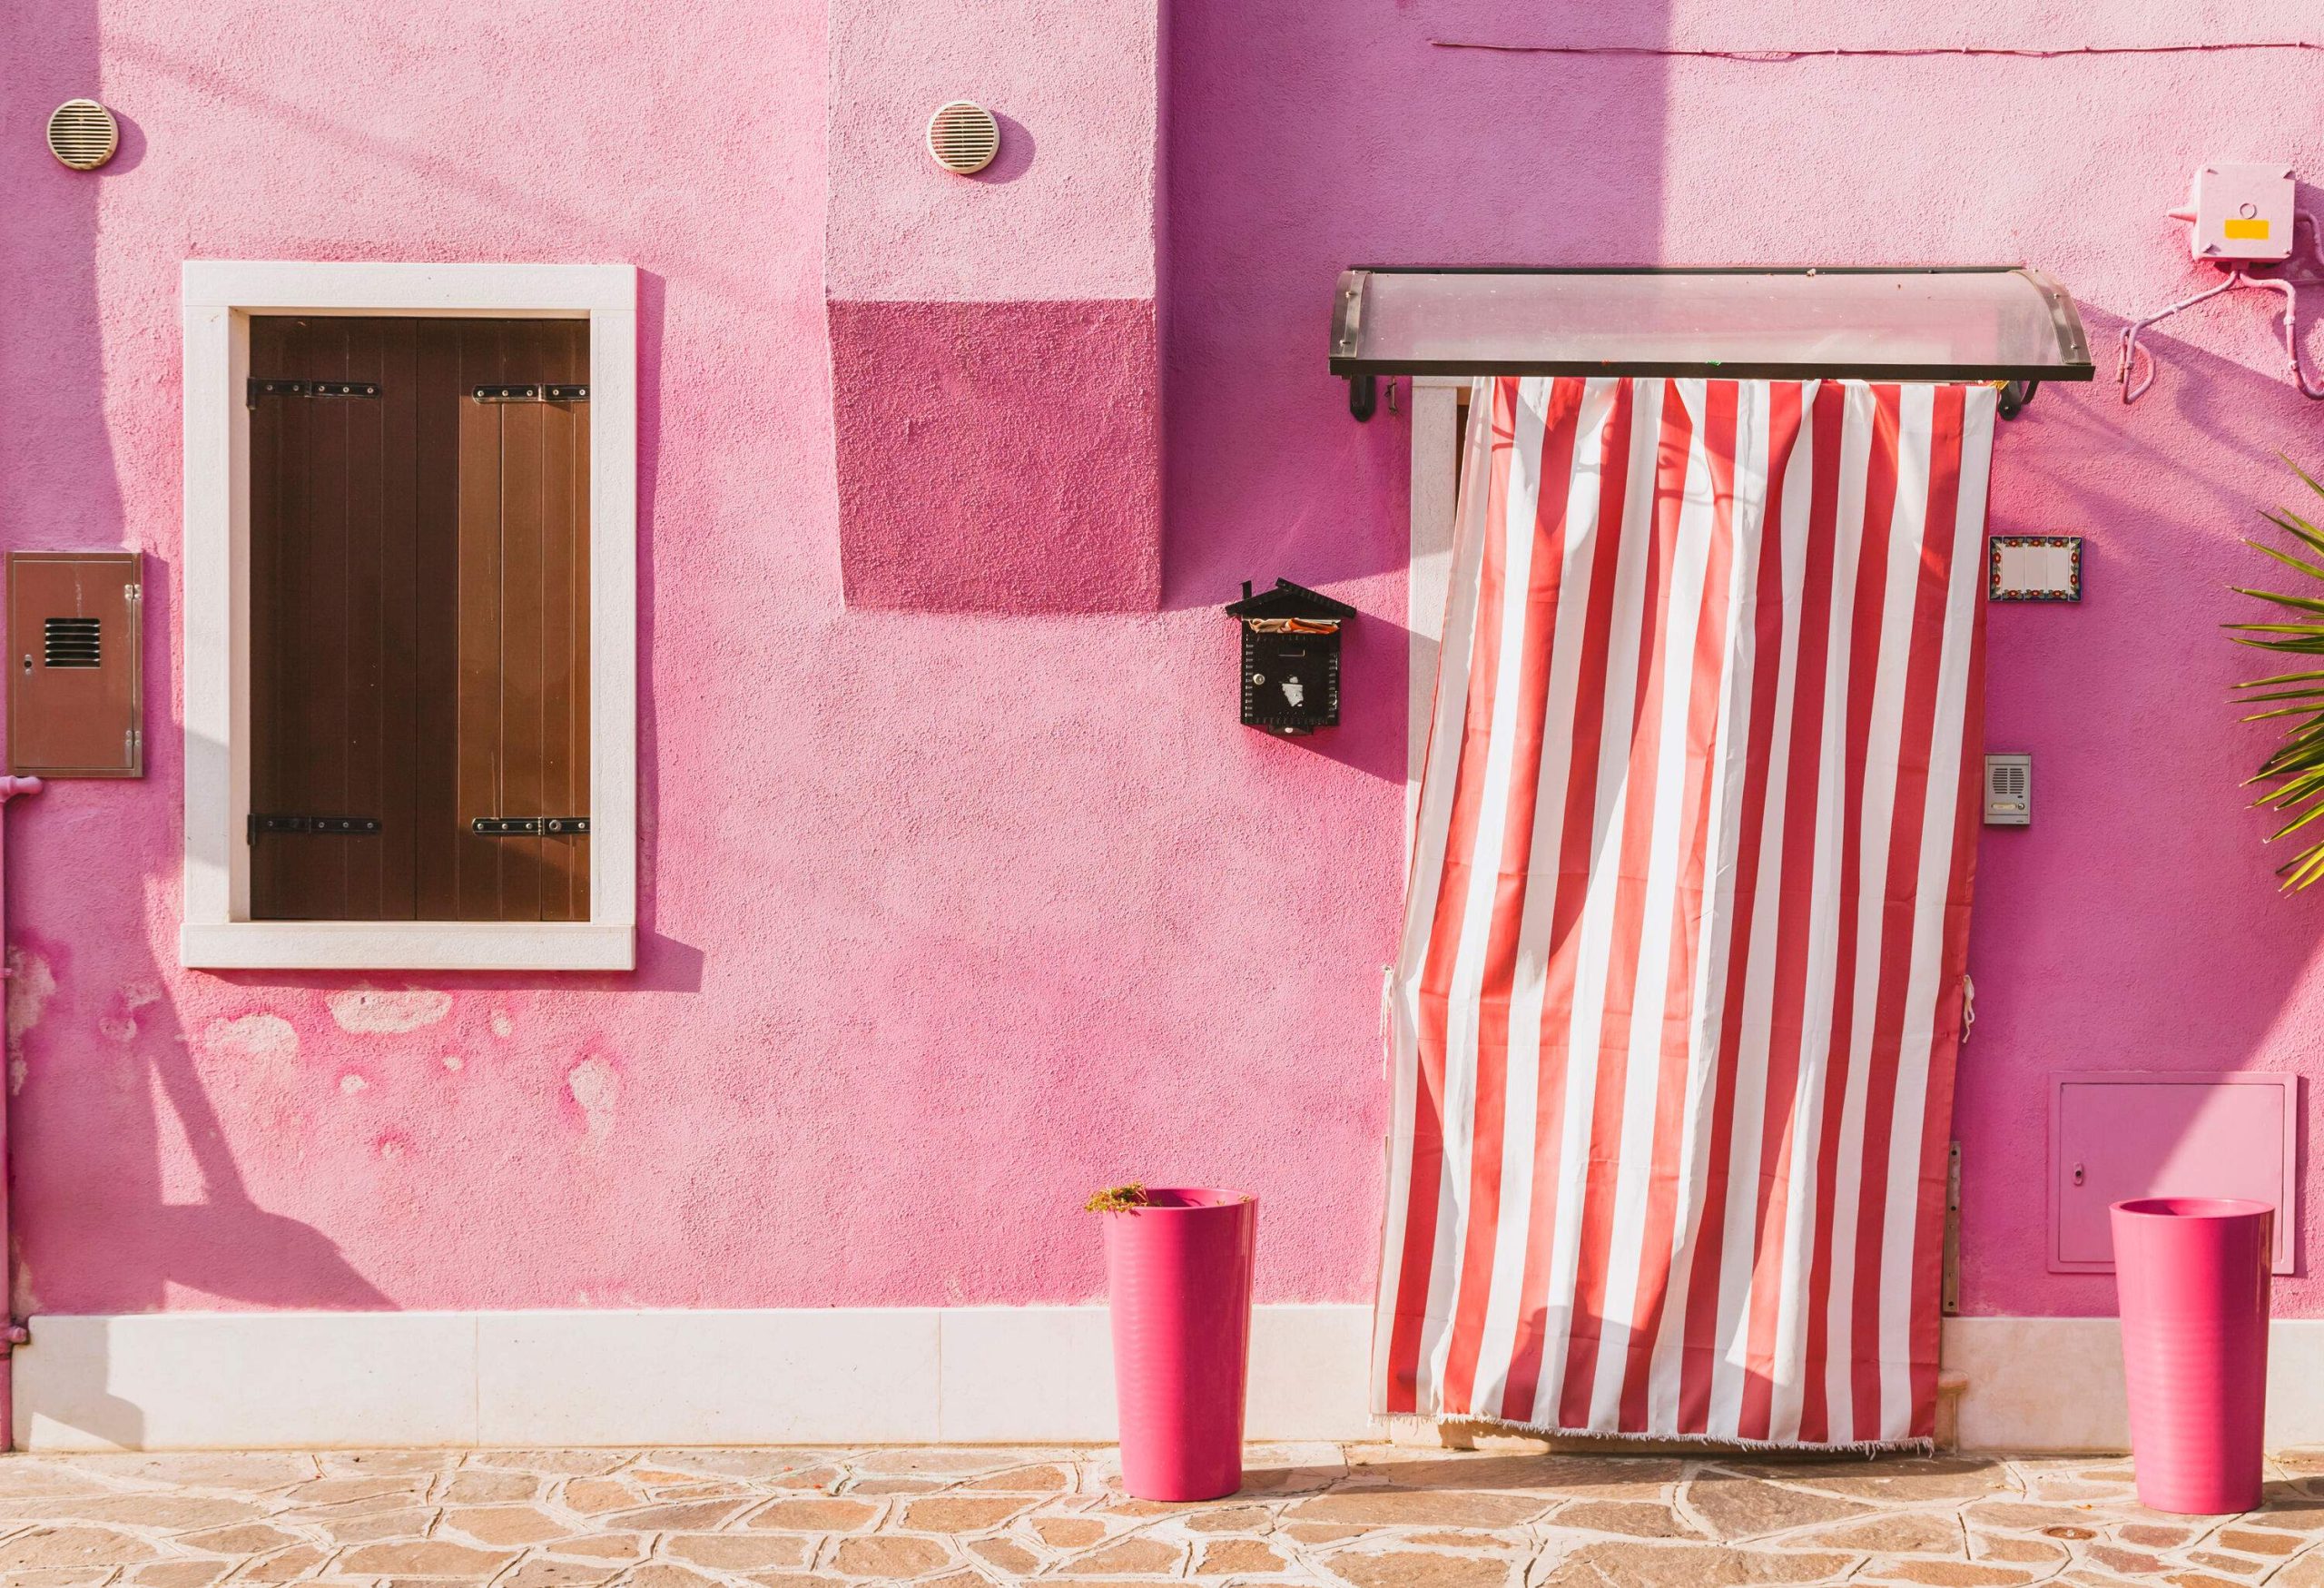 A pink stucco structure with a white-trimmed window and a red and white striped door cover.